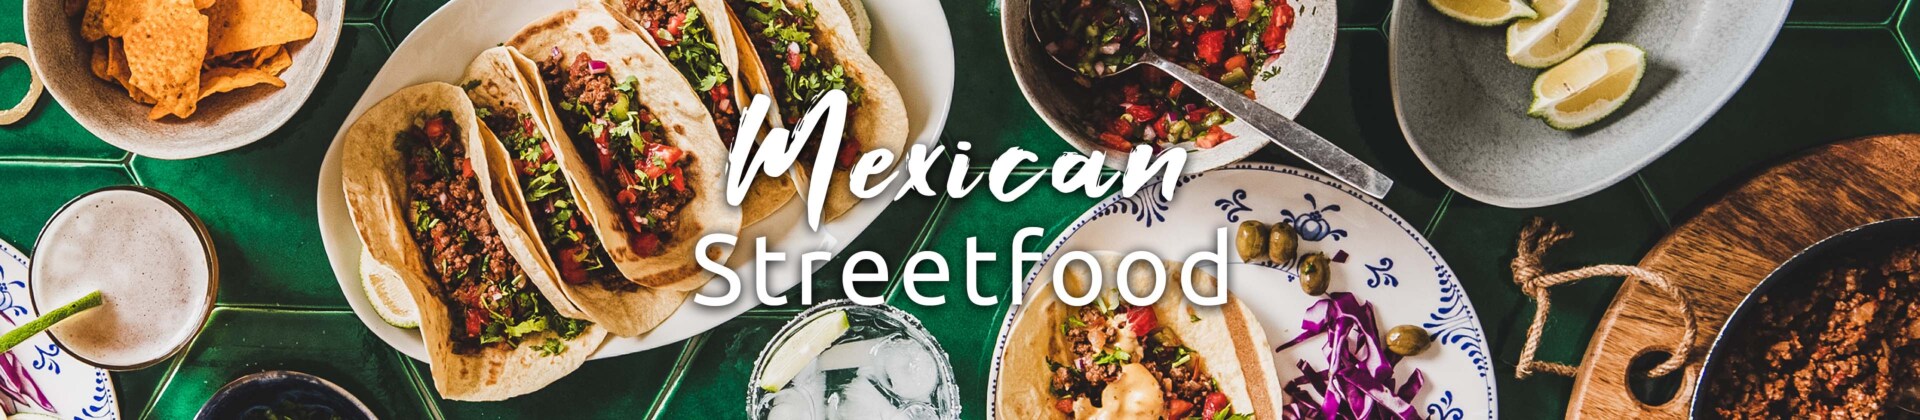 Streetfood mexican